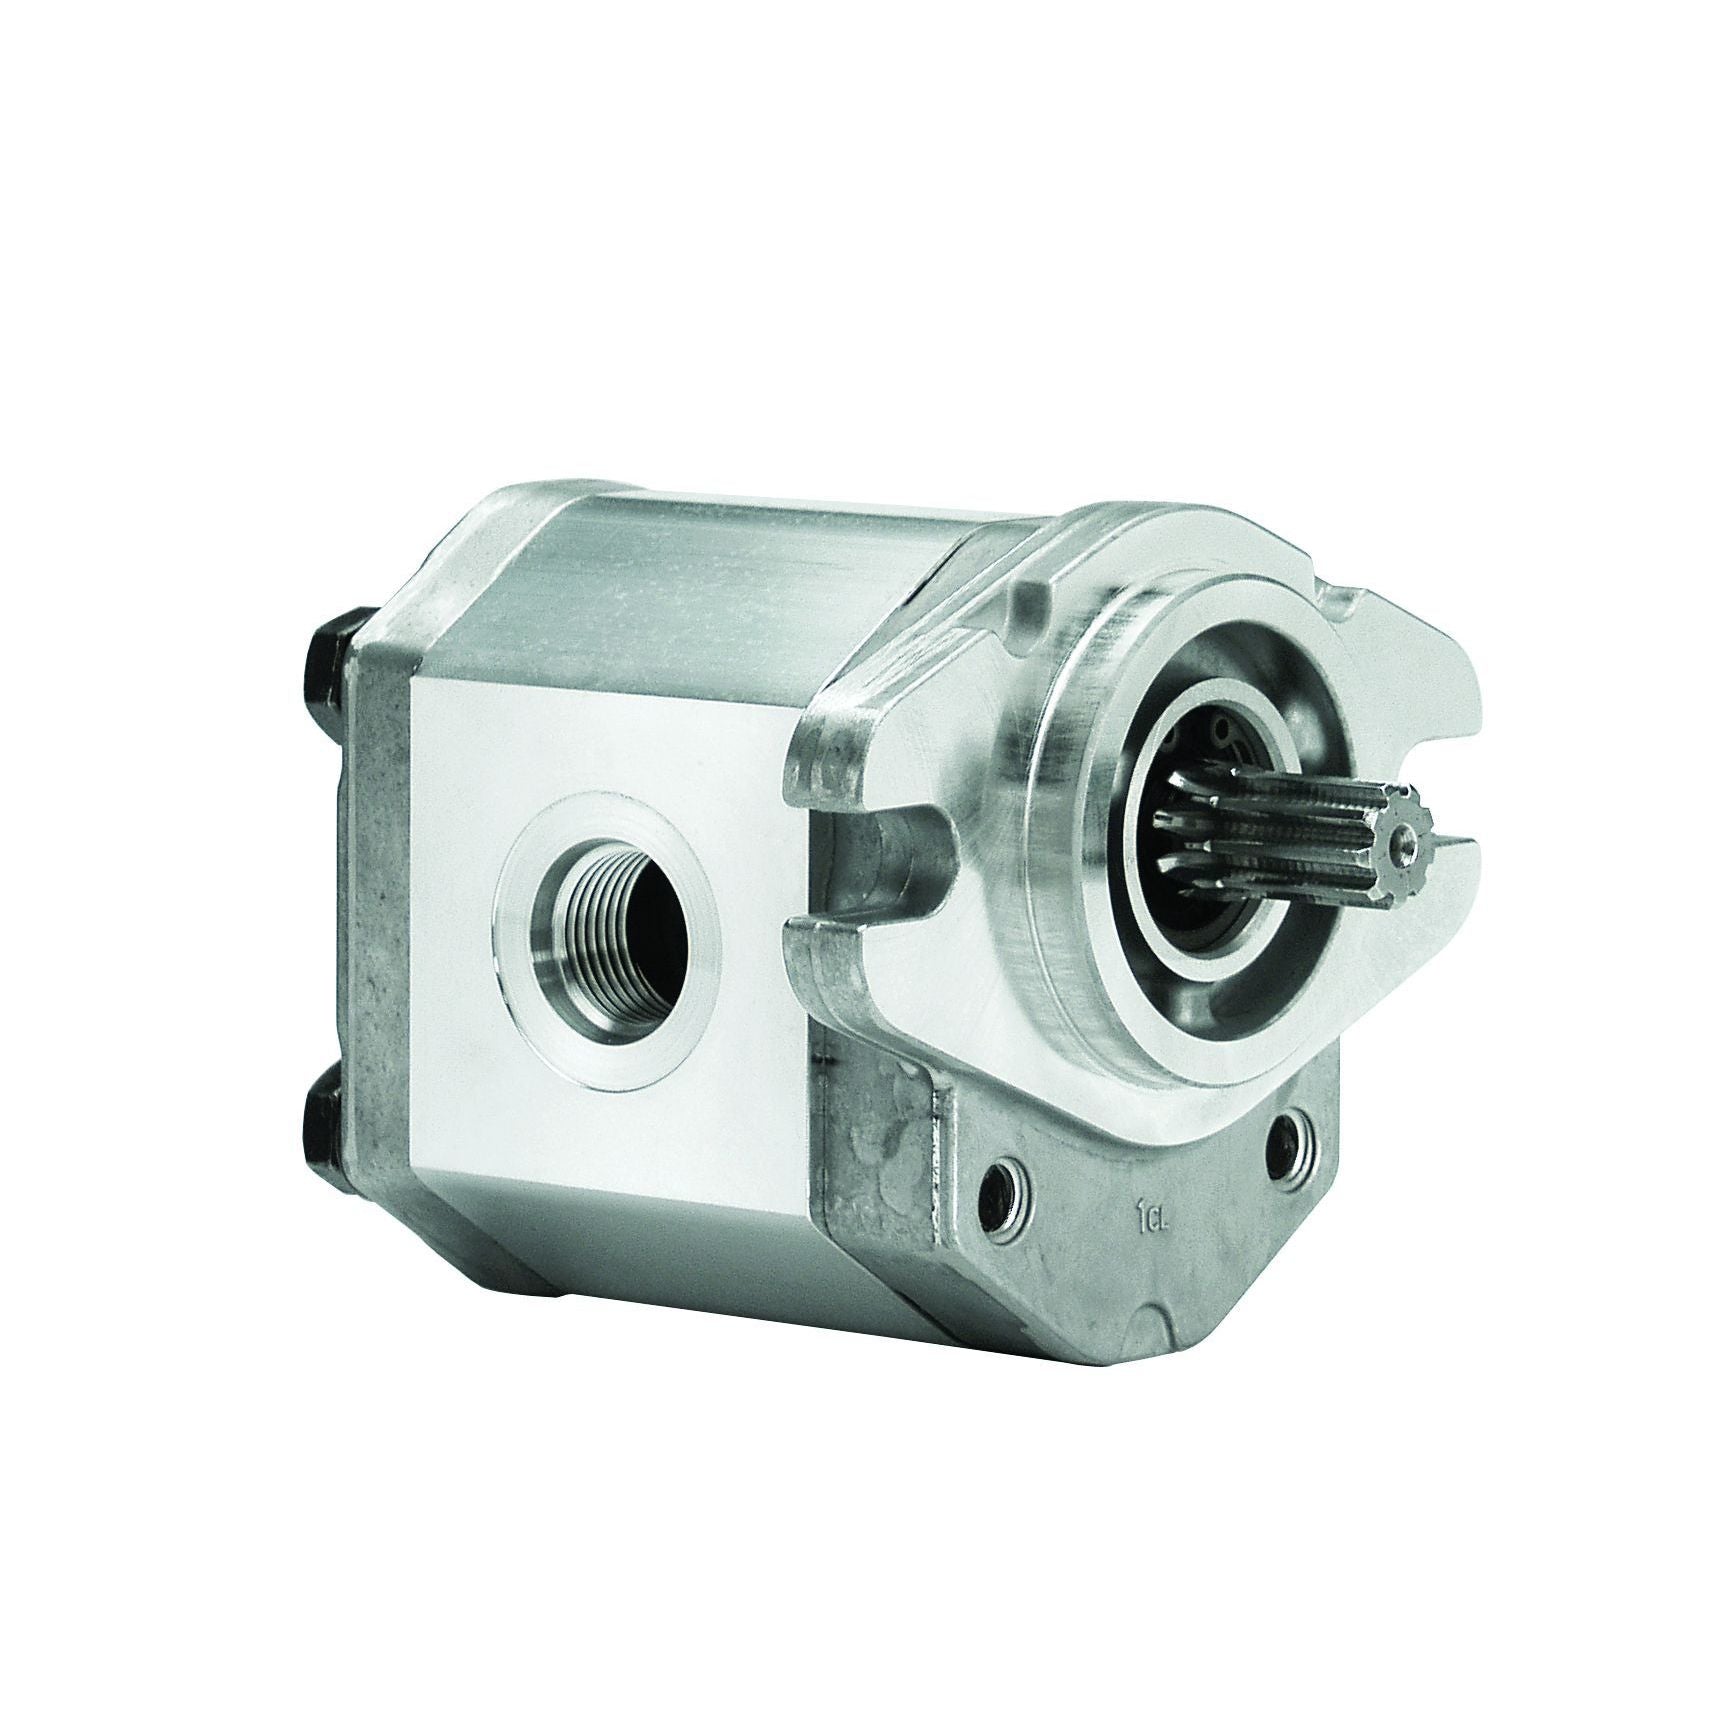 ALP3A-D-60-S1-FA : Marzocchi Gear Pump, CW, 39cc (2.379in3), 18.54 GPM, 3190psi, 3000 RPM, #20 SAE (1.25") In, #12 SAE (3/4") Out, Splined Shaft 13T 16/32DP, SAE B 2-Bolt Mount